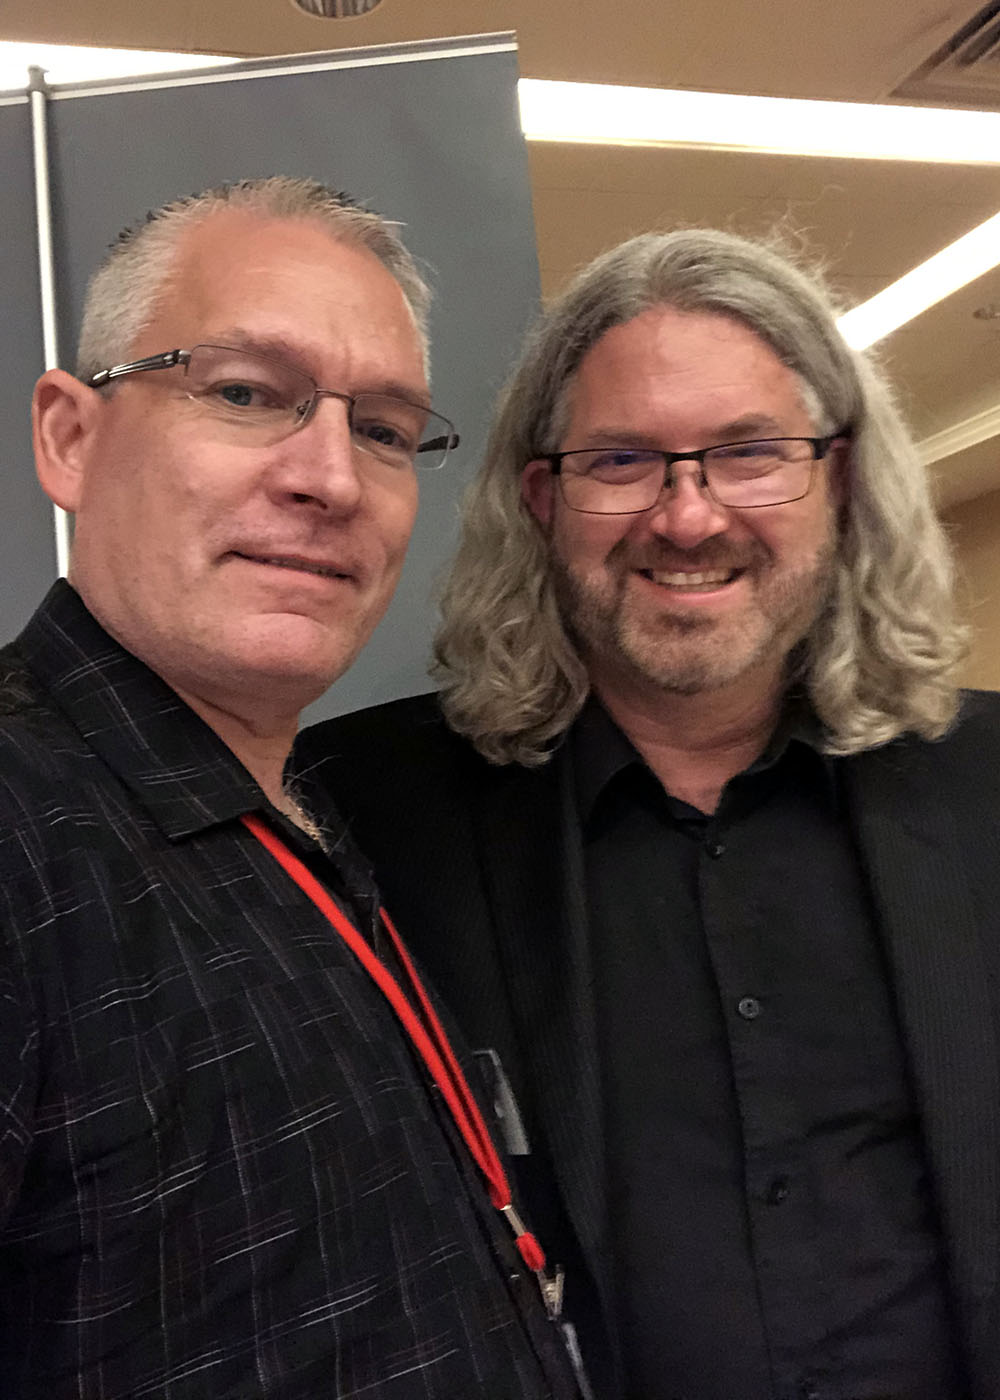 Andrew Hochheimer and Dave Scott of Spaced Out Radio Oct, 2019